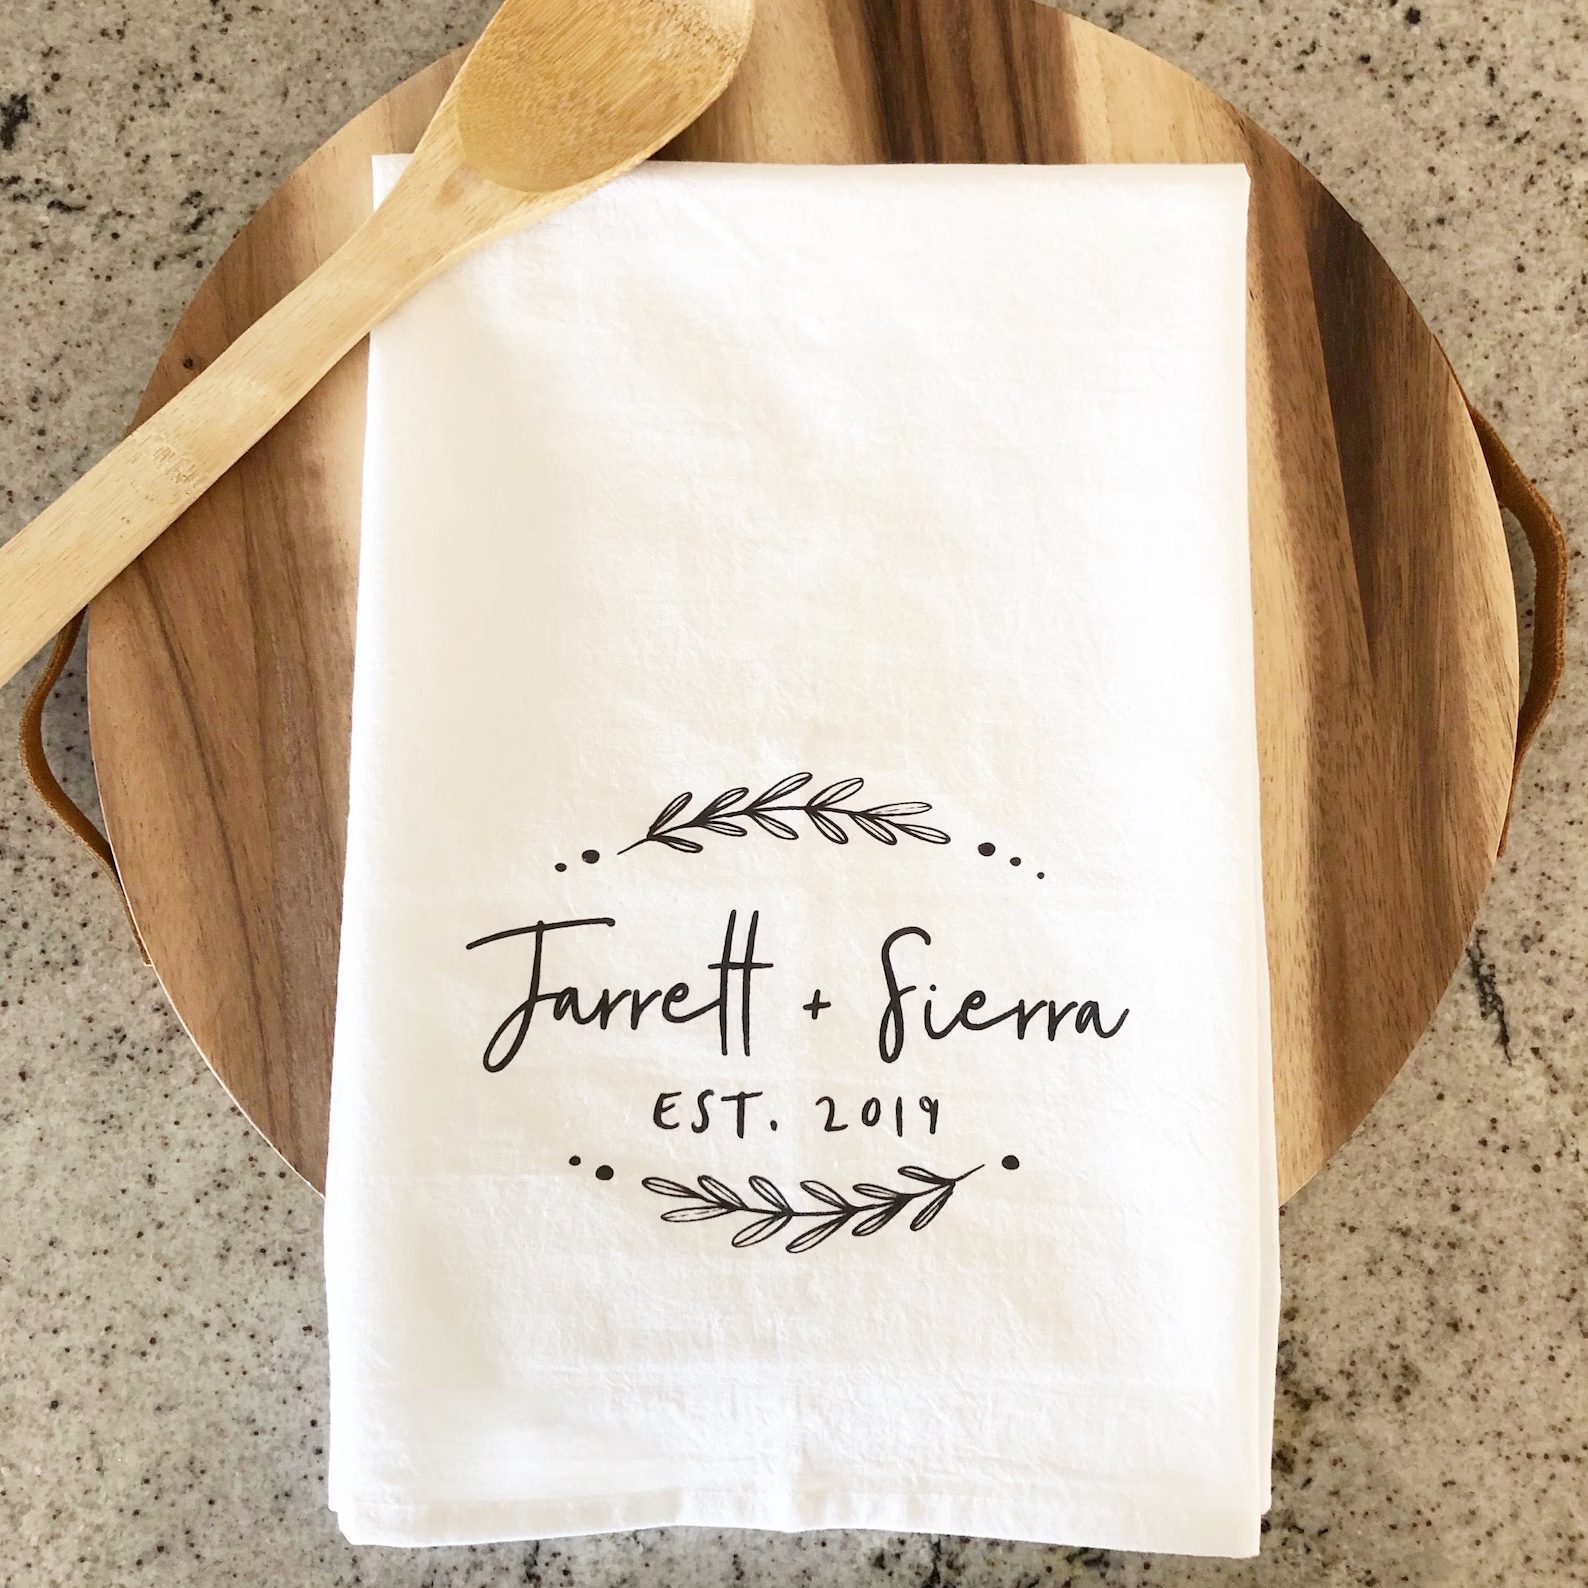 Custom Printed Kitchen Towel for the Cooking Couple